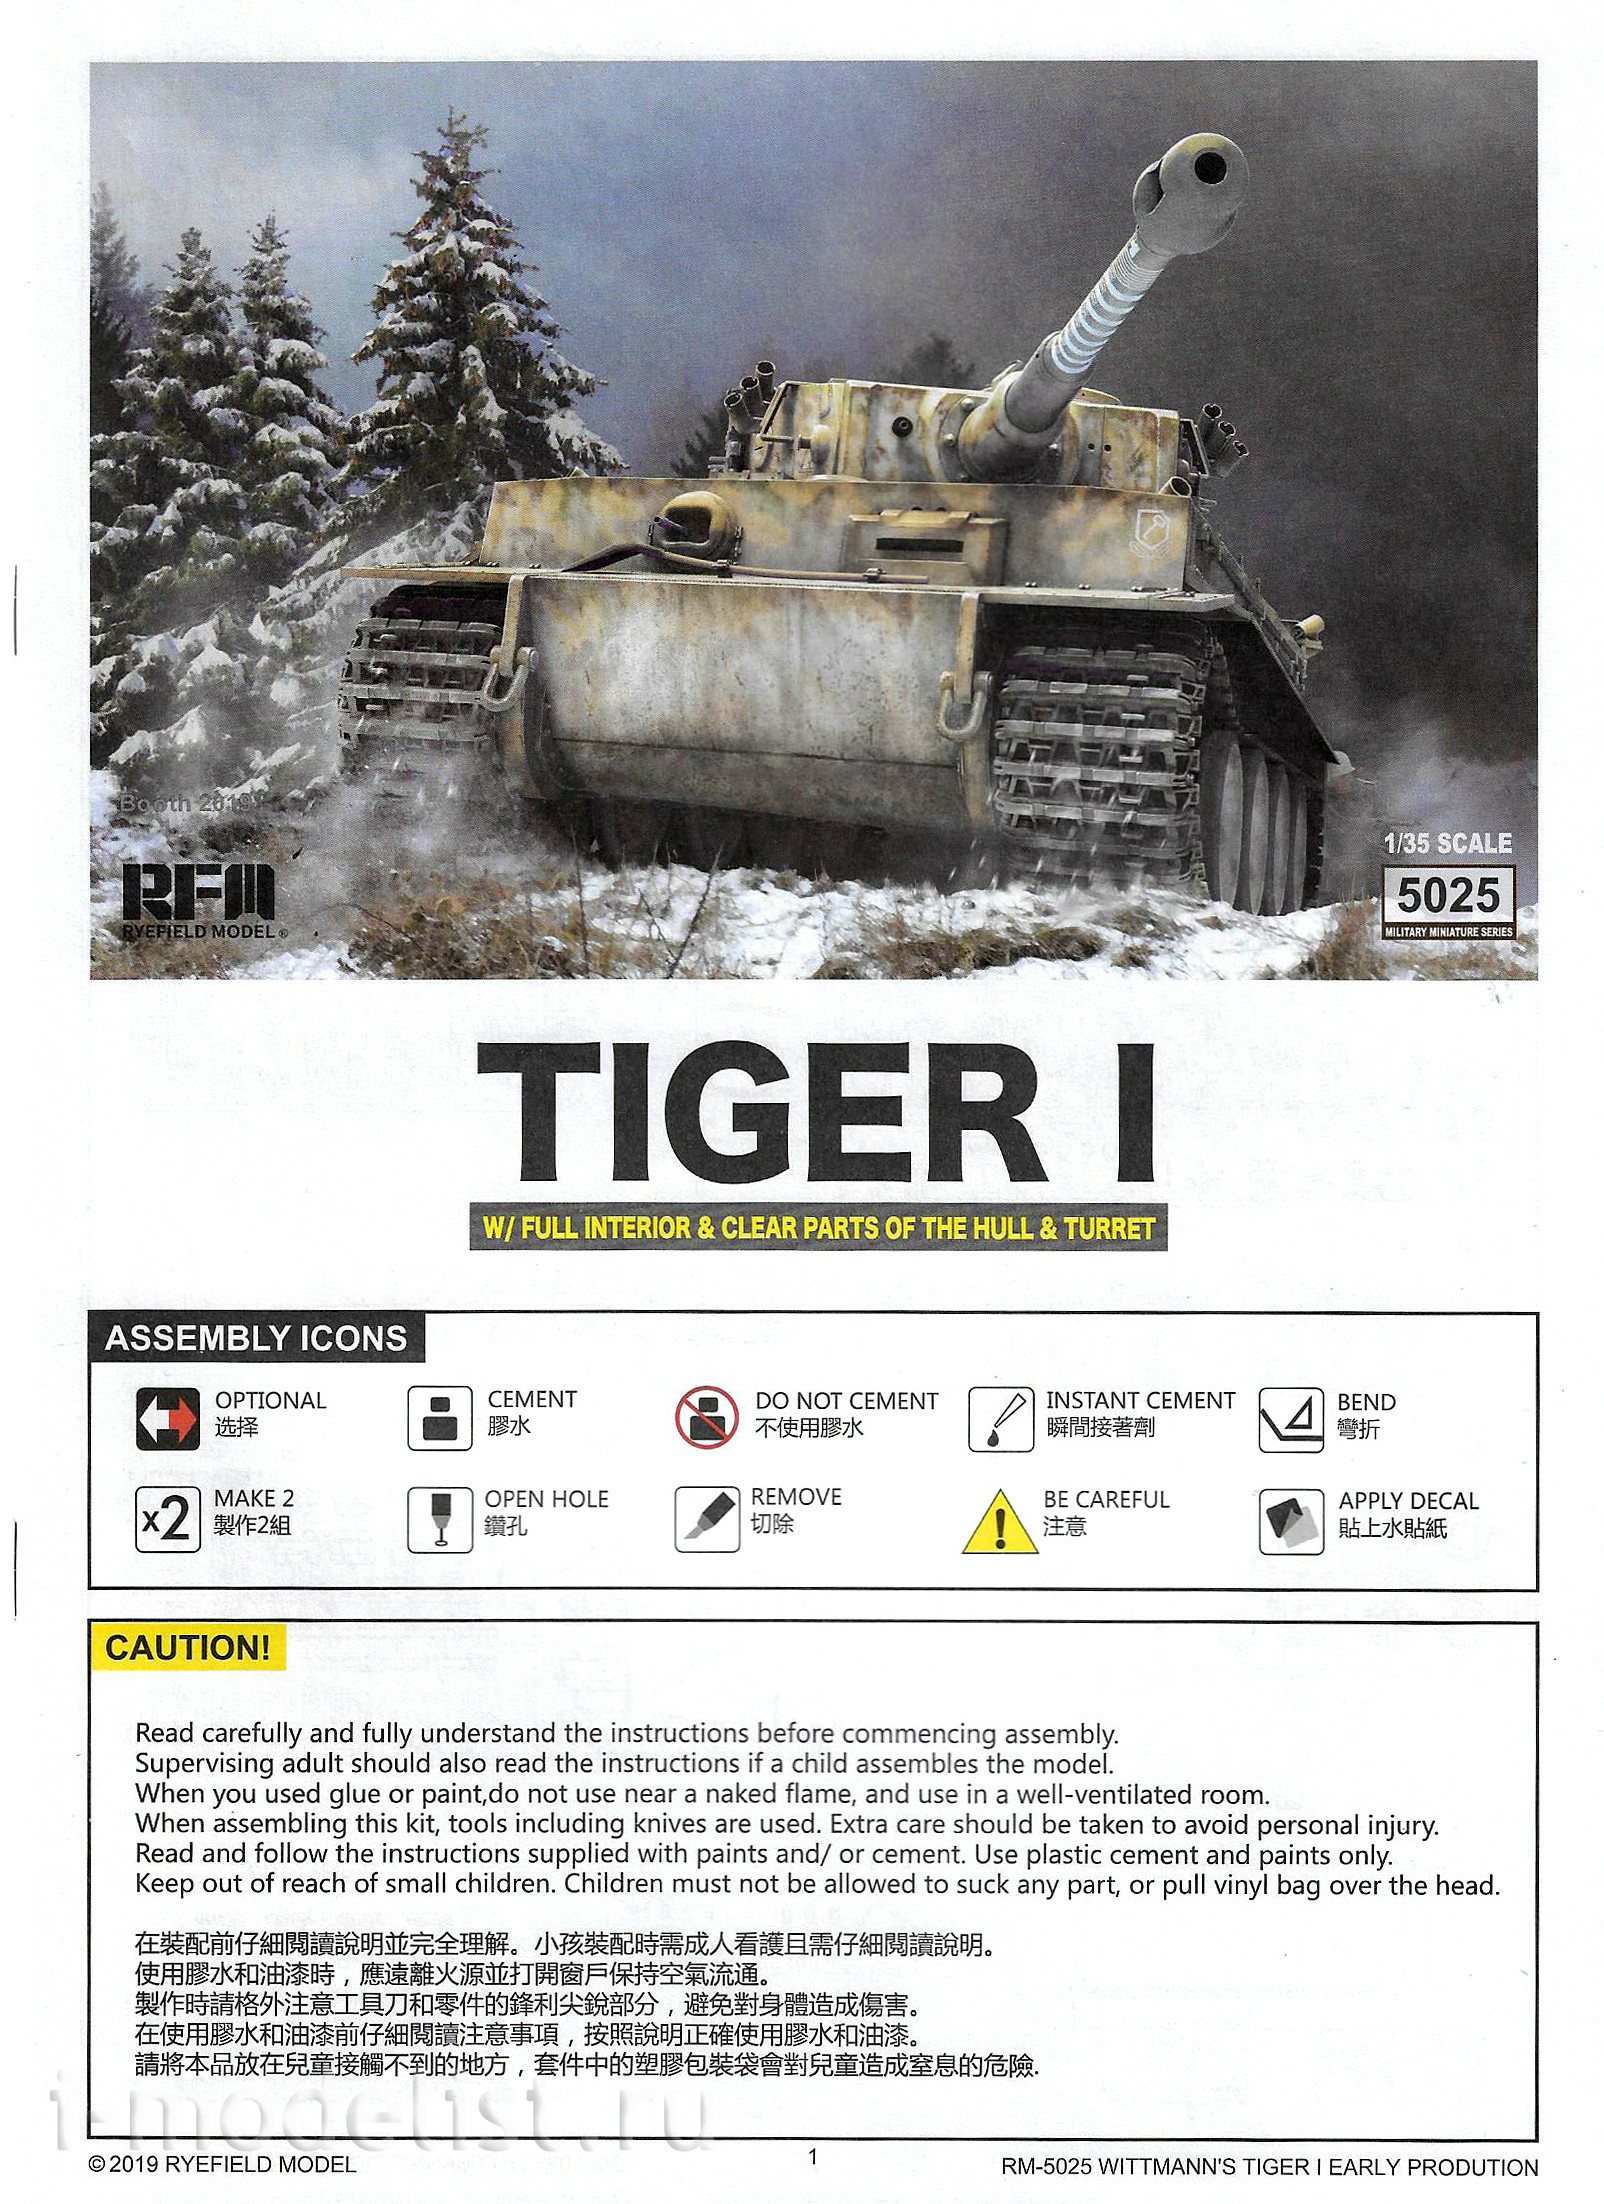 RM-5025 Rye Field Model 1/35 German Tiger I Early Production Wittmann's Tiger No. 504 w/ full interior